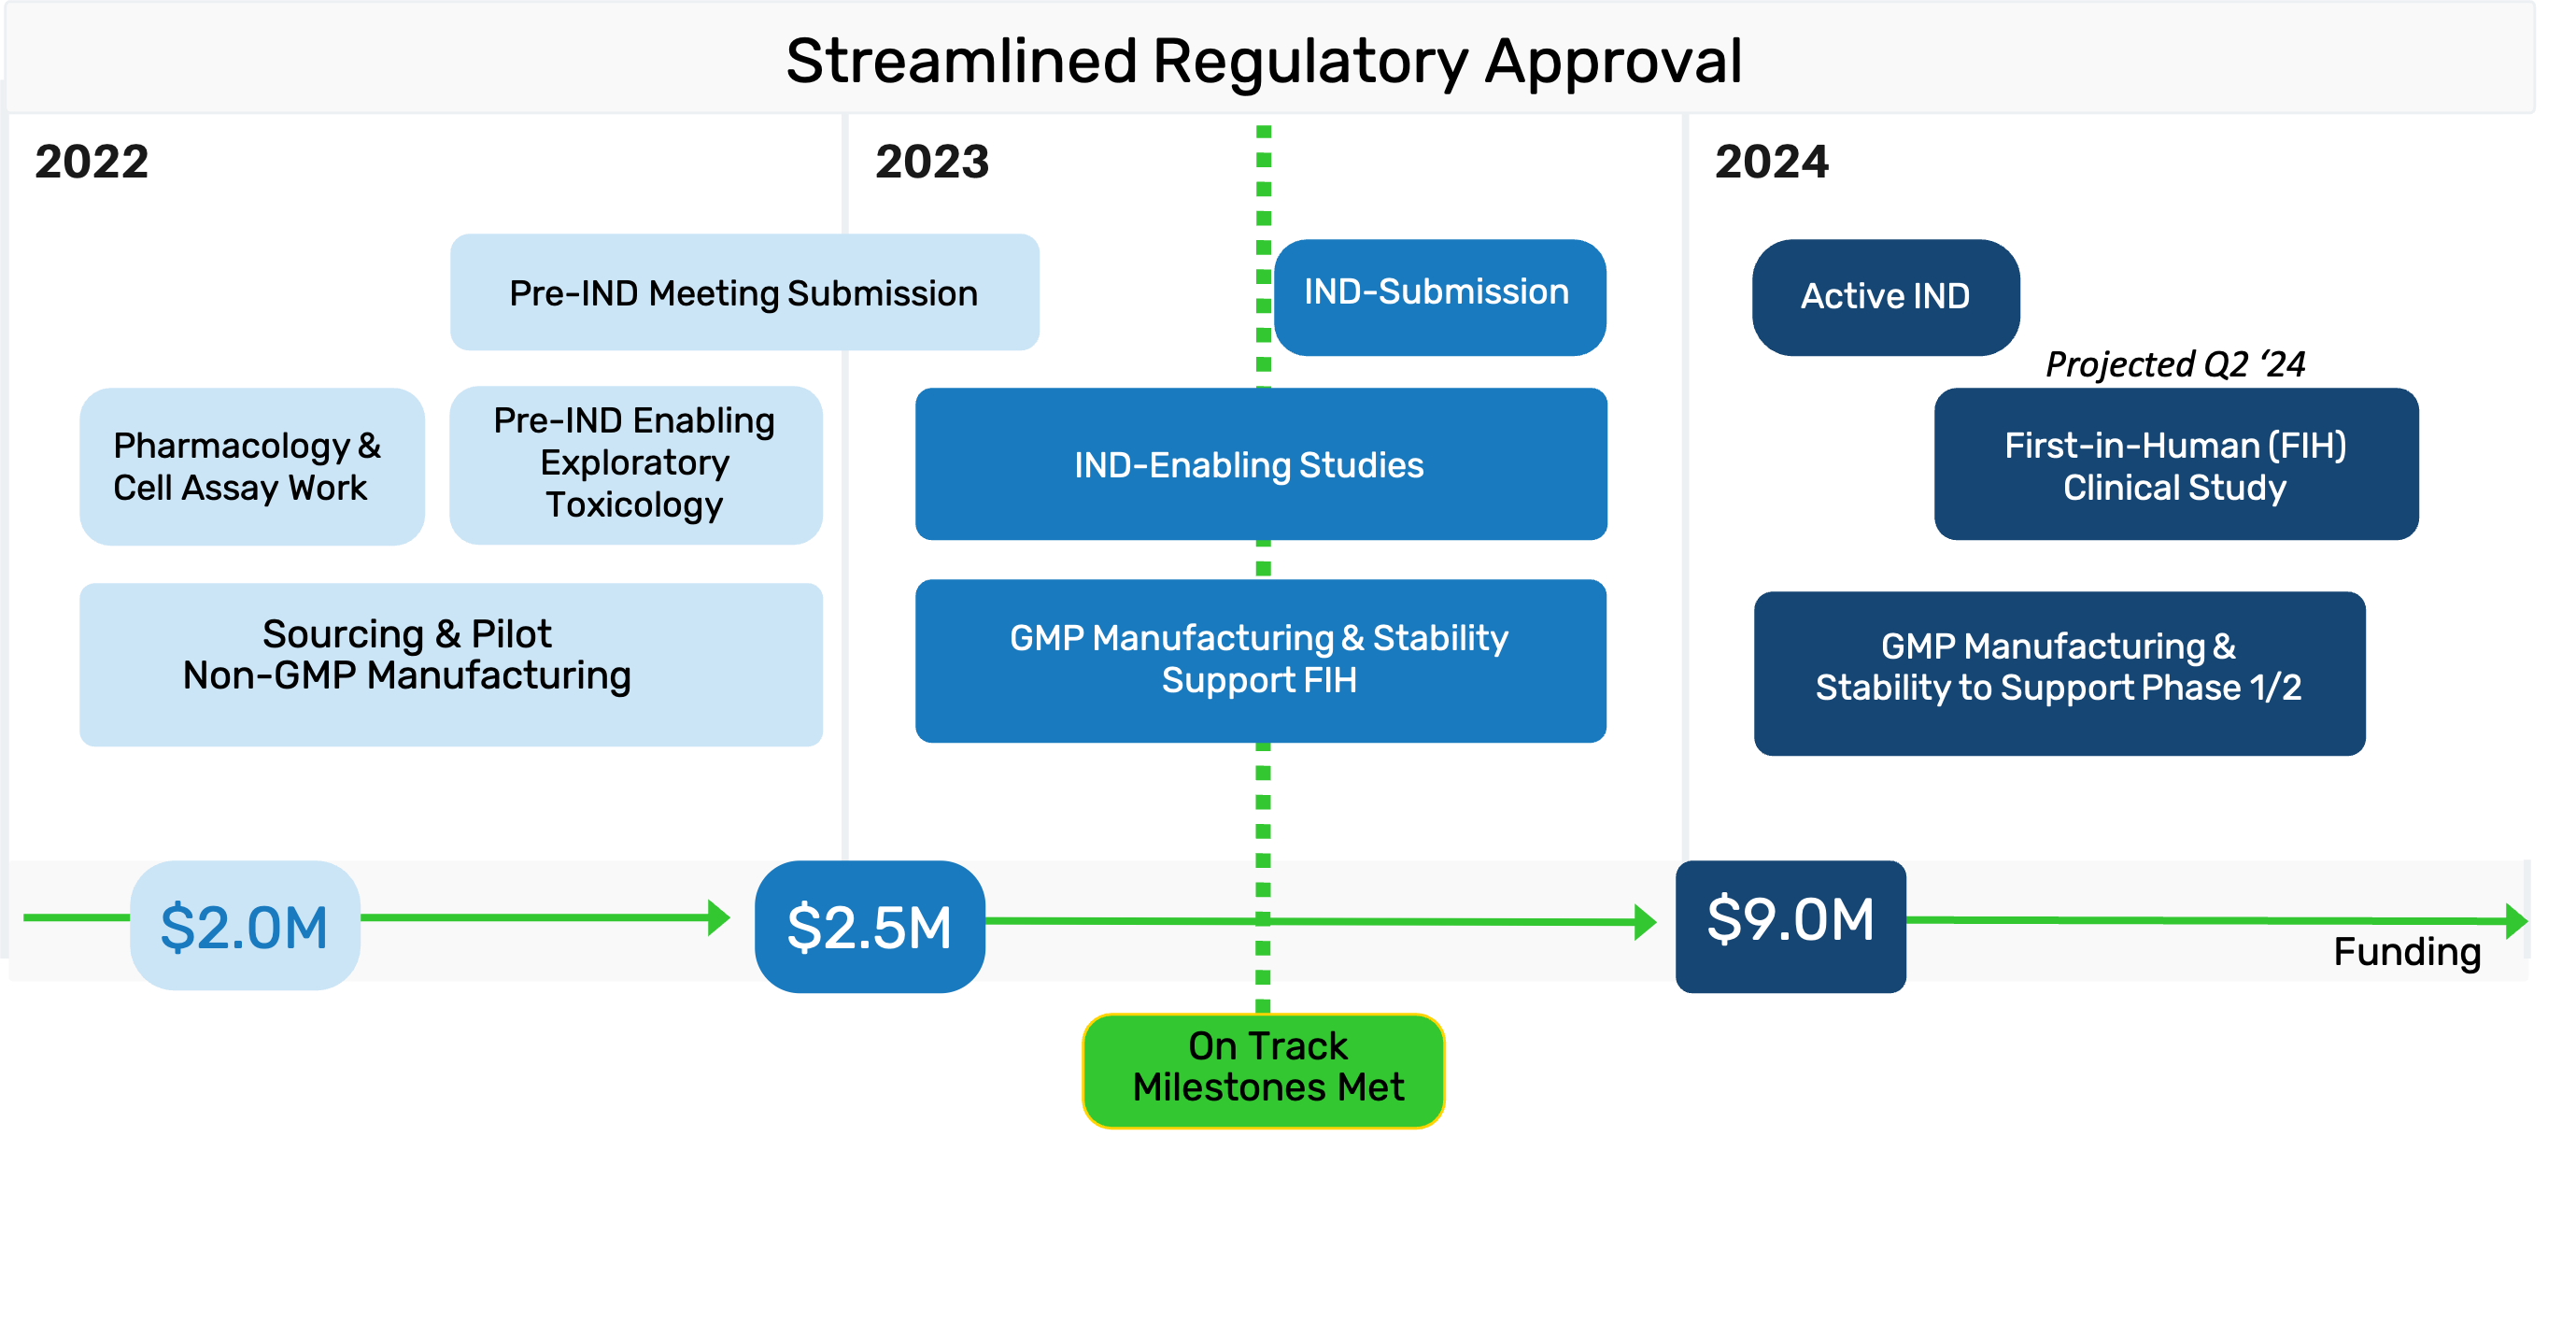 Streamlined Regulatory Approval. Team on track meeting milestones. Goal in human by Q2 2024.